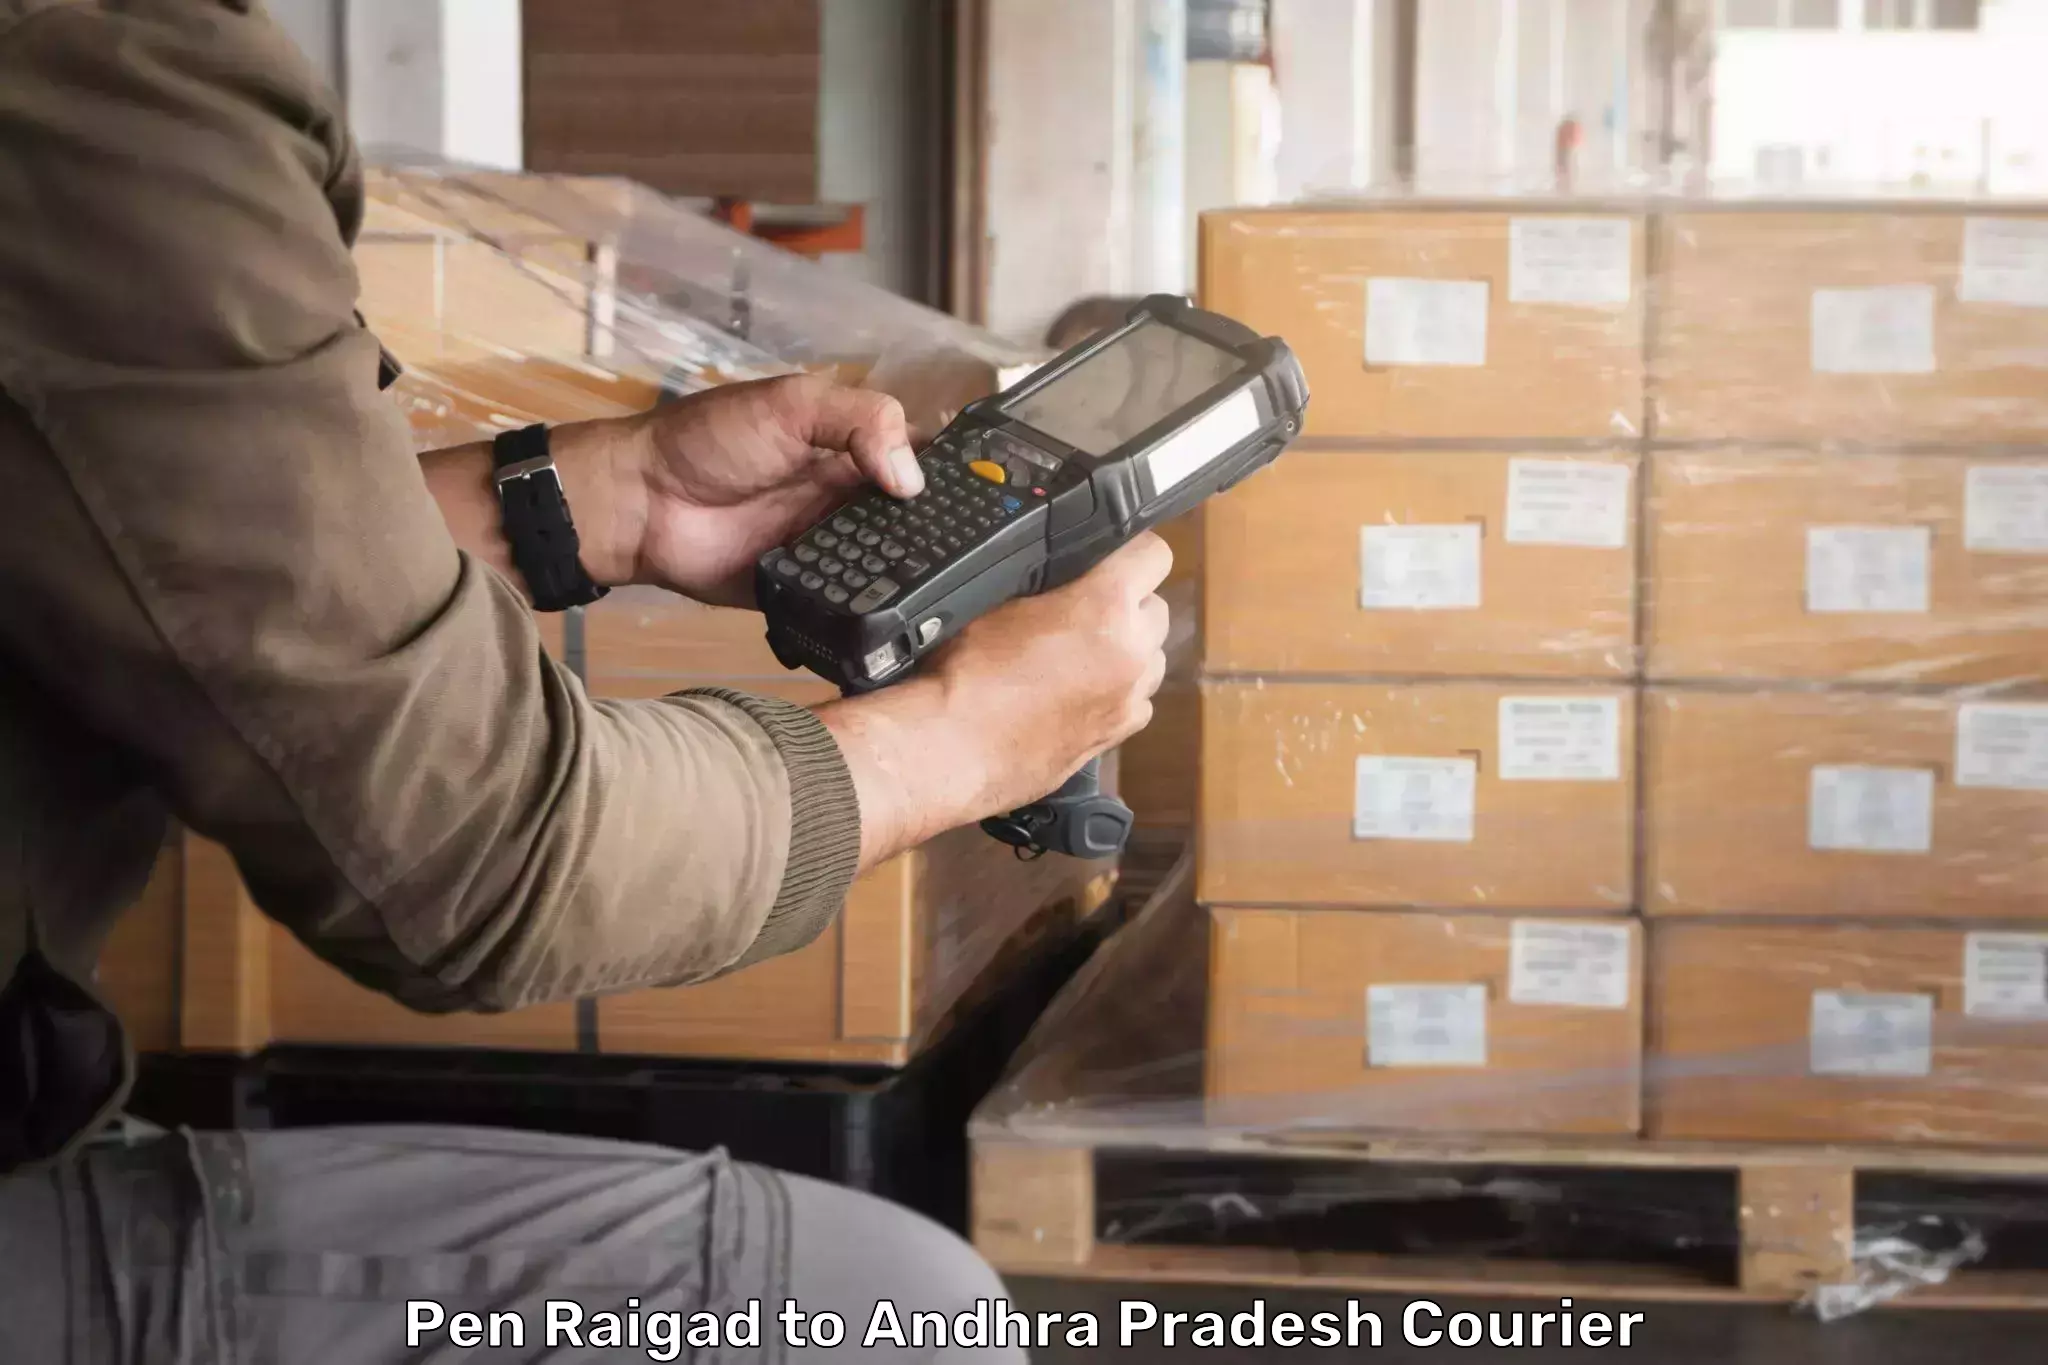 Multi-national courier services Pen Raigad to Buckinghampet